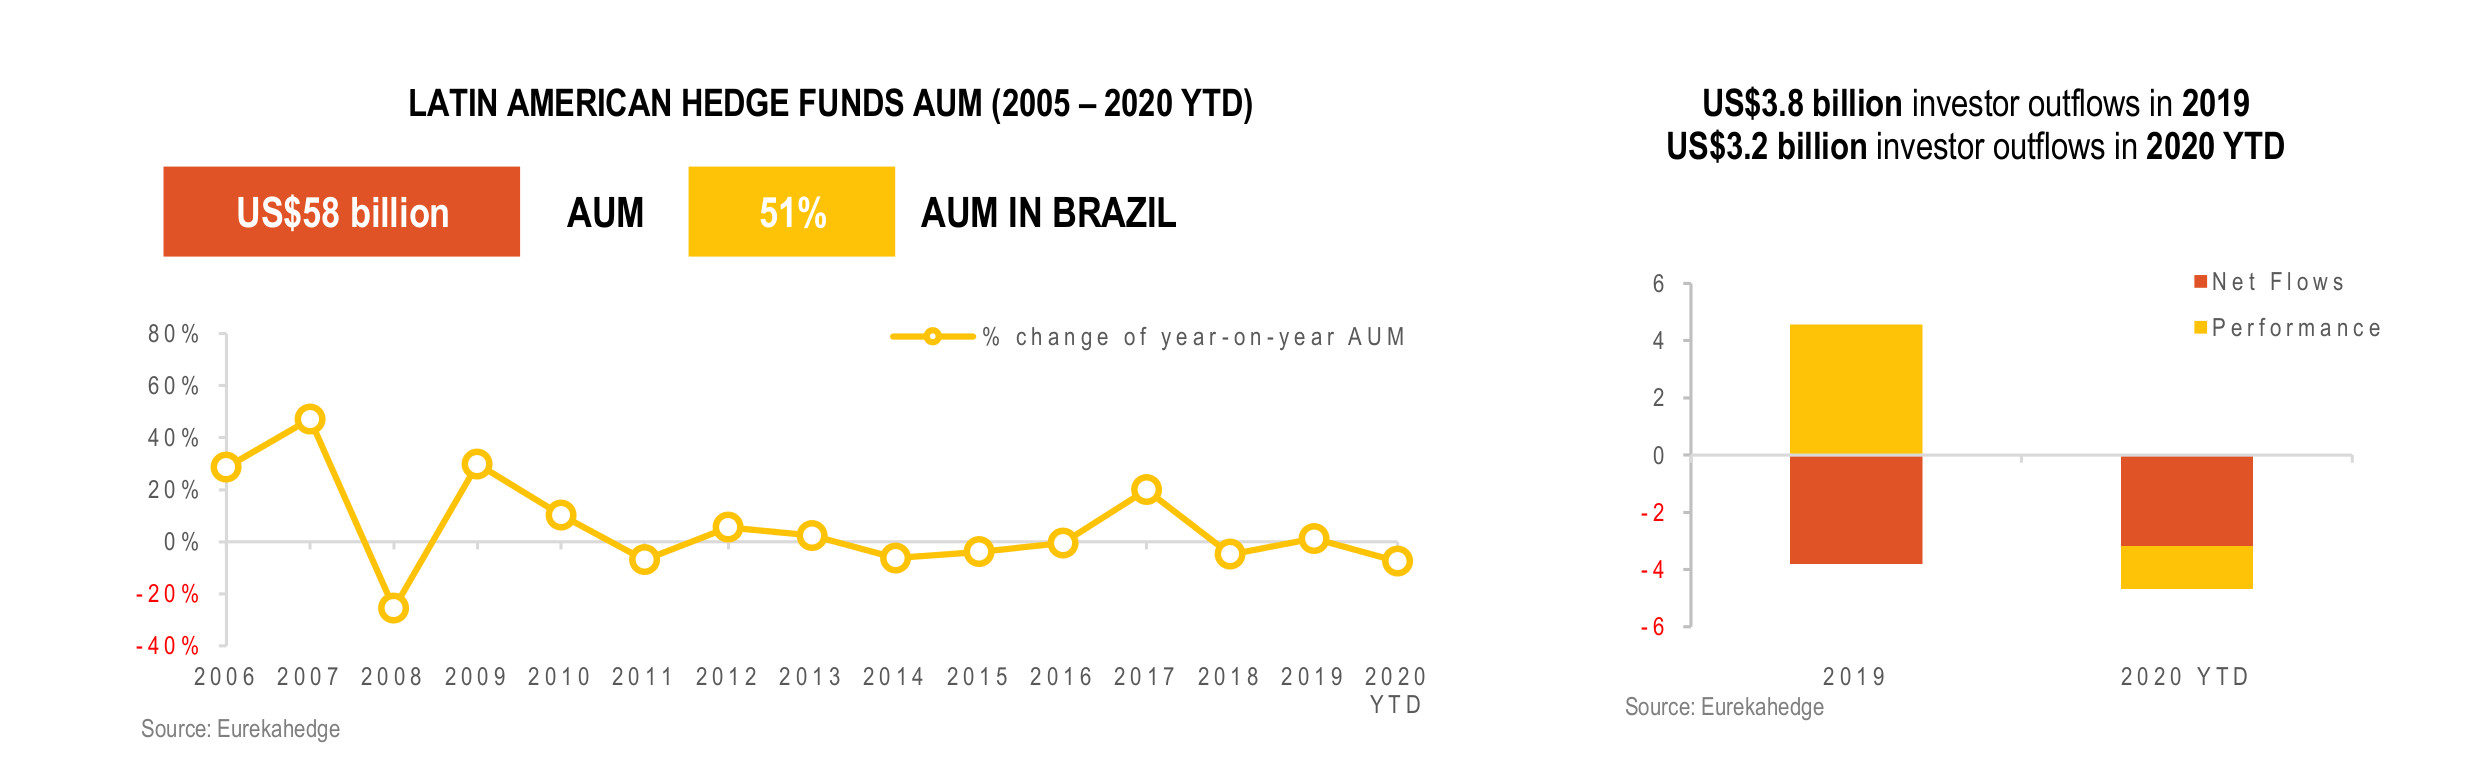 Latin American Hedge Funds Infographic September 2020 - AUM